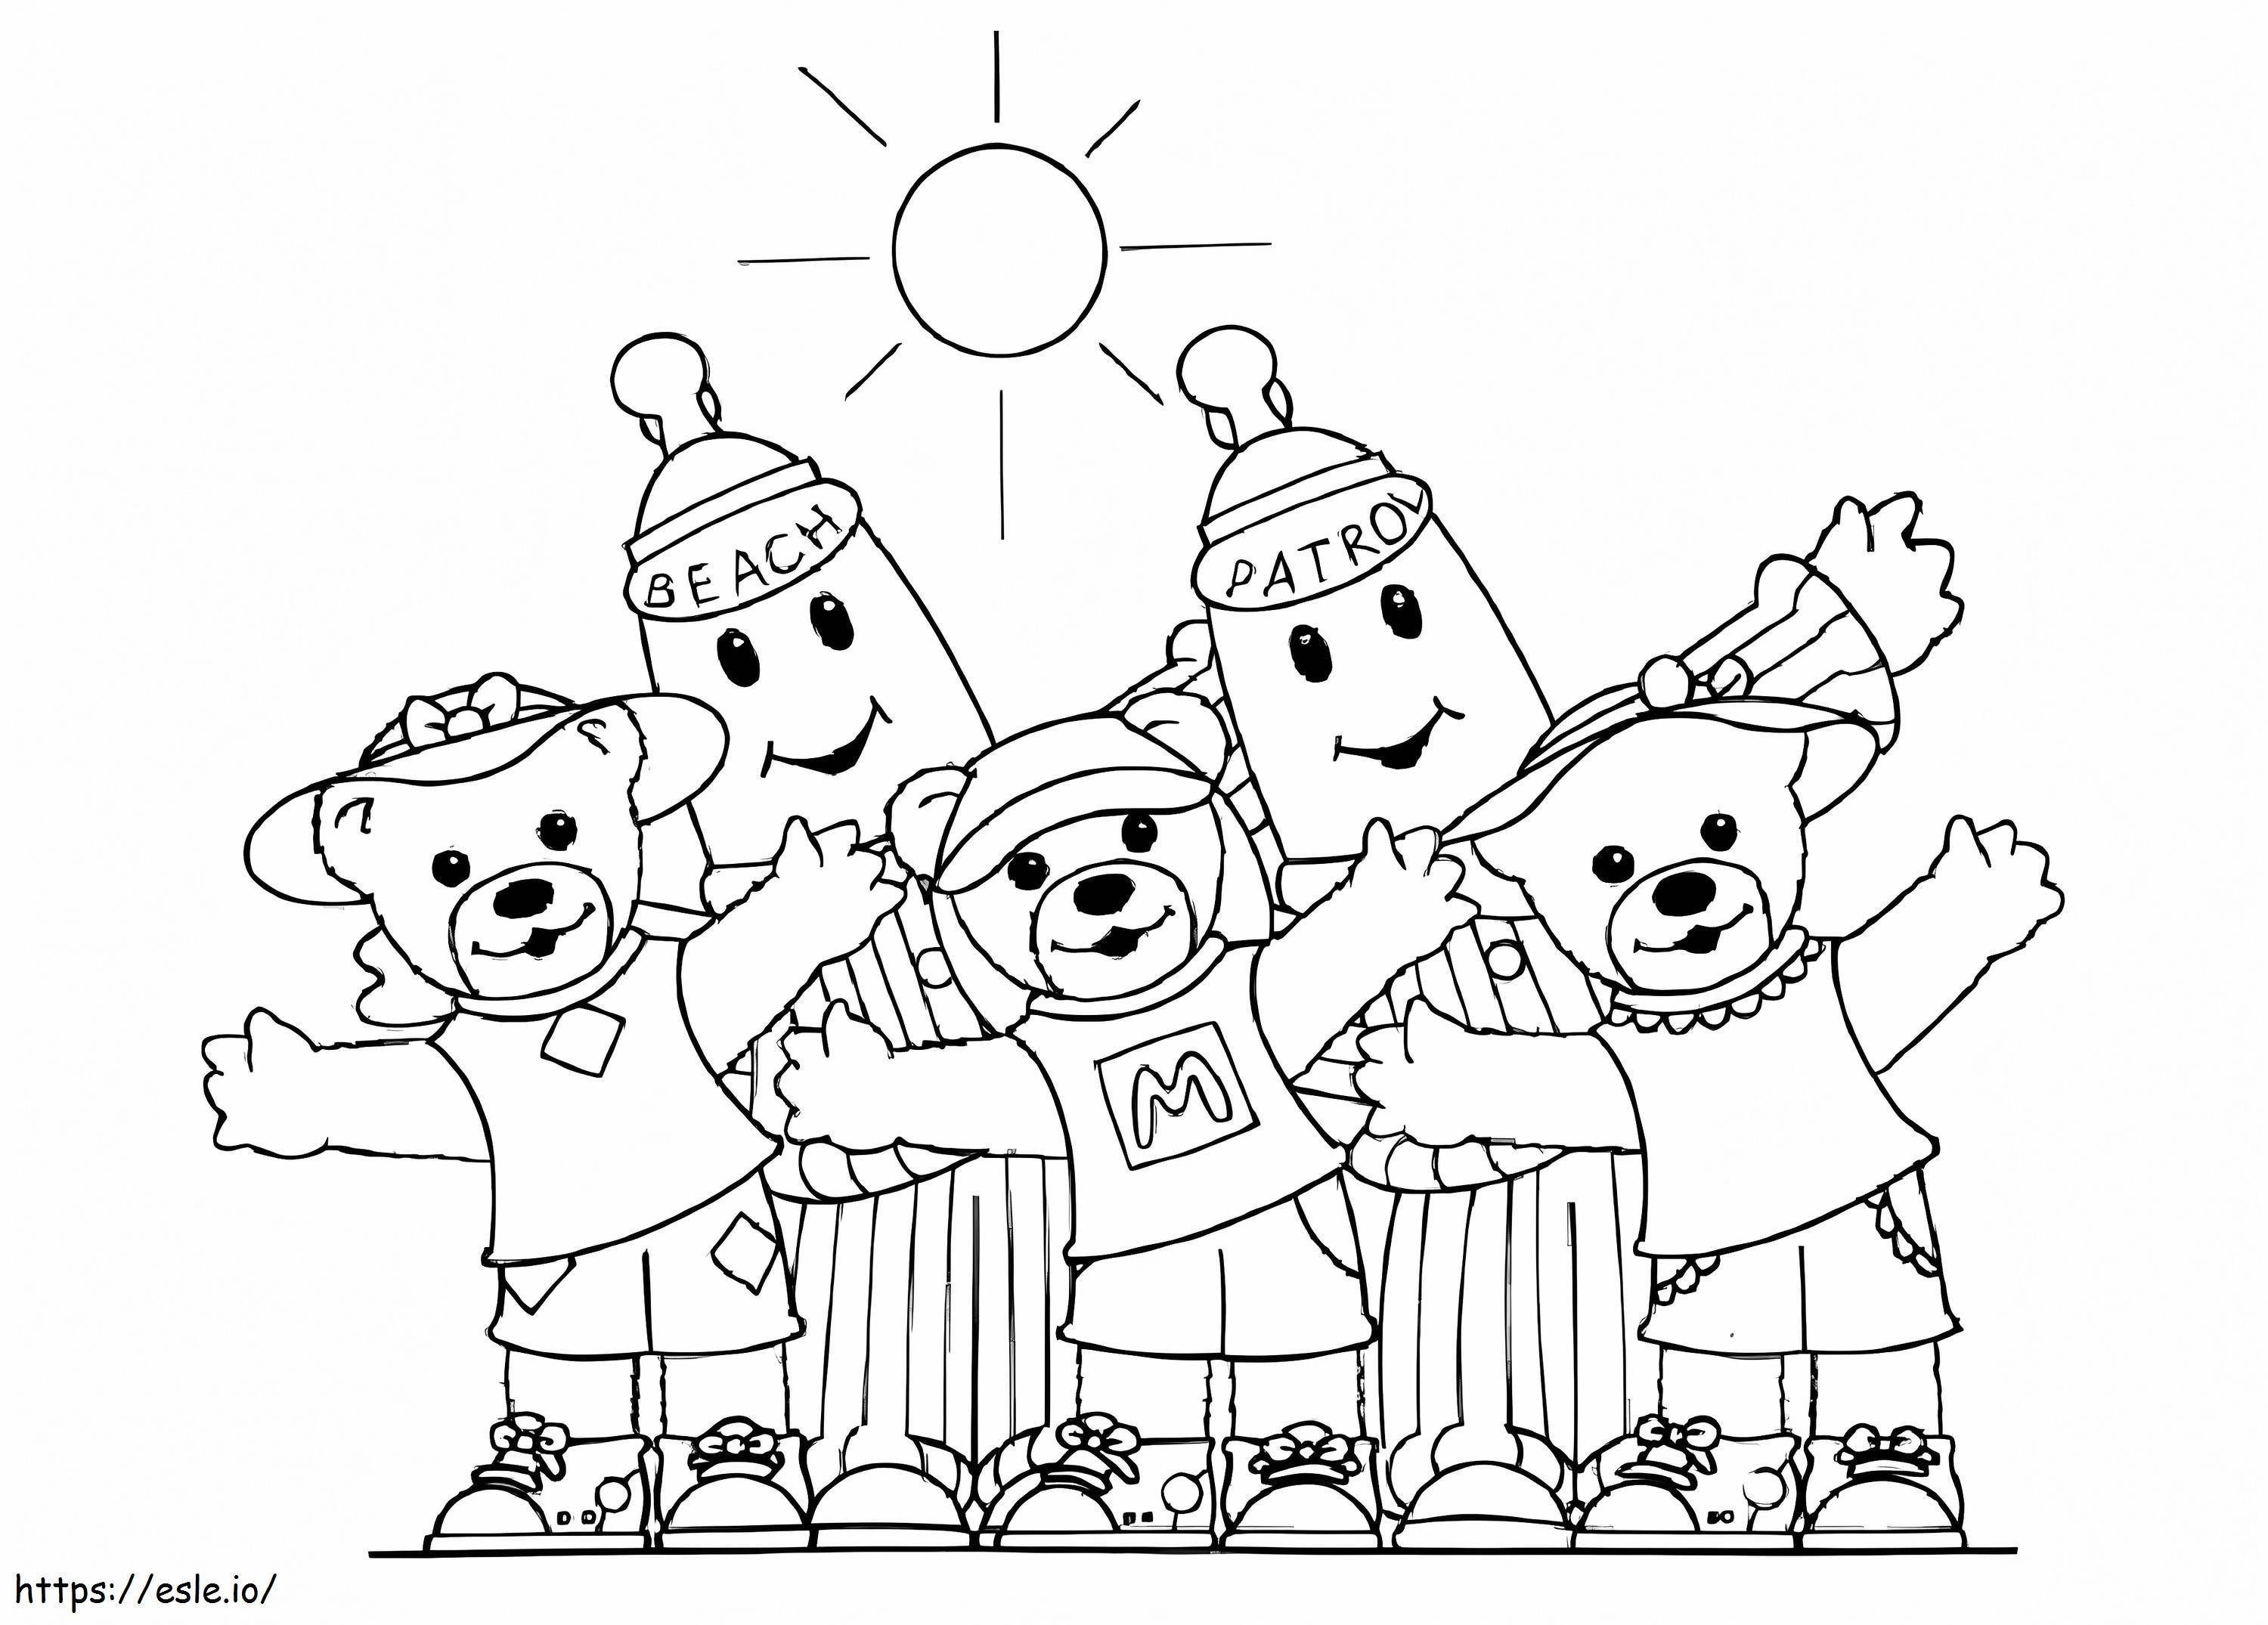 Bananas In Pyjamas And Friends 1 coloring page